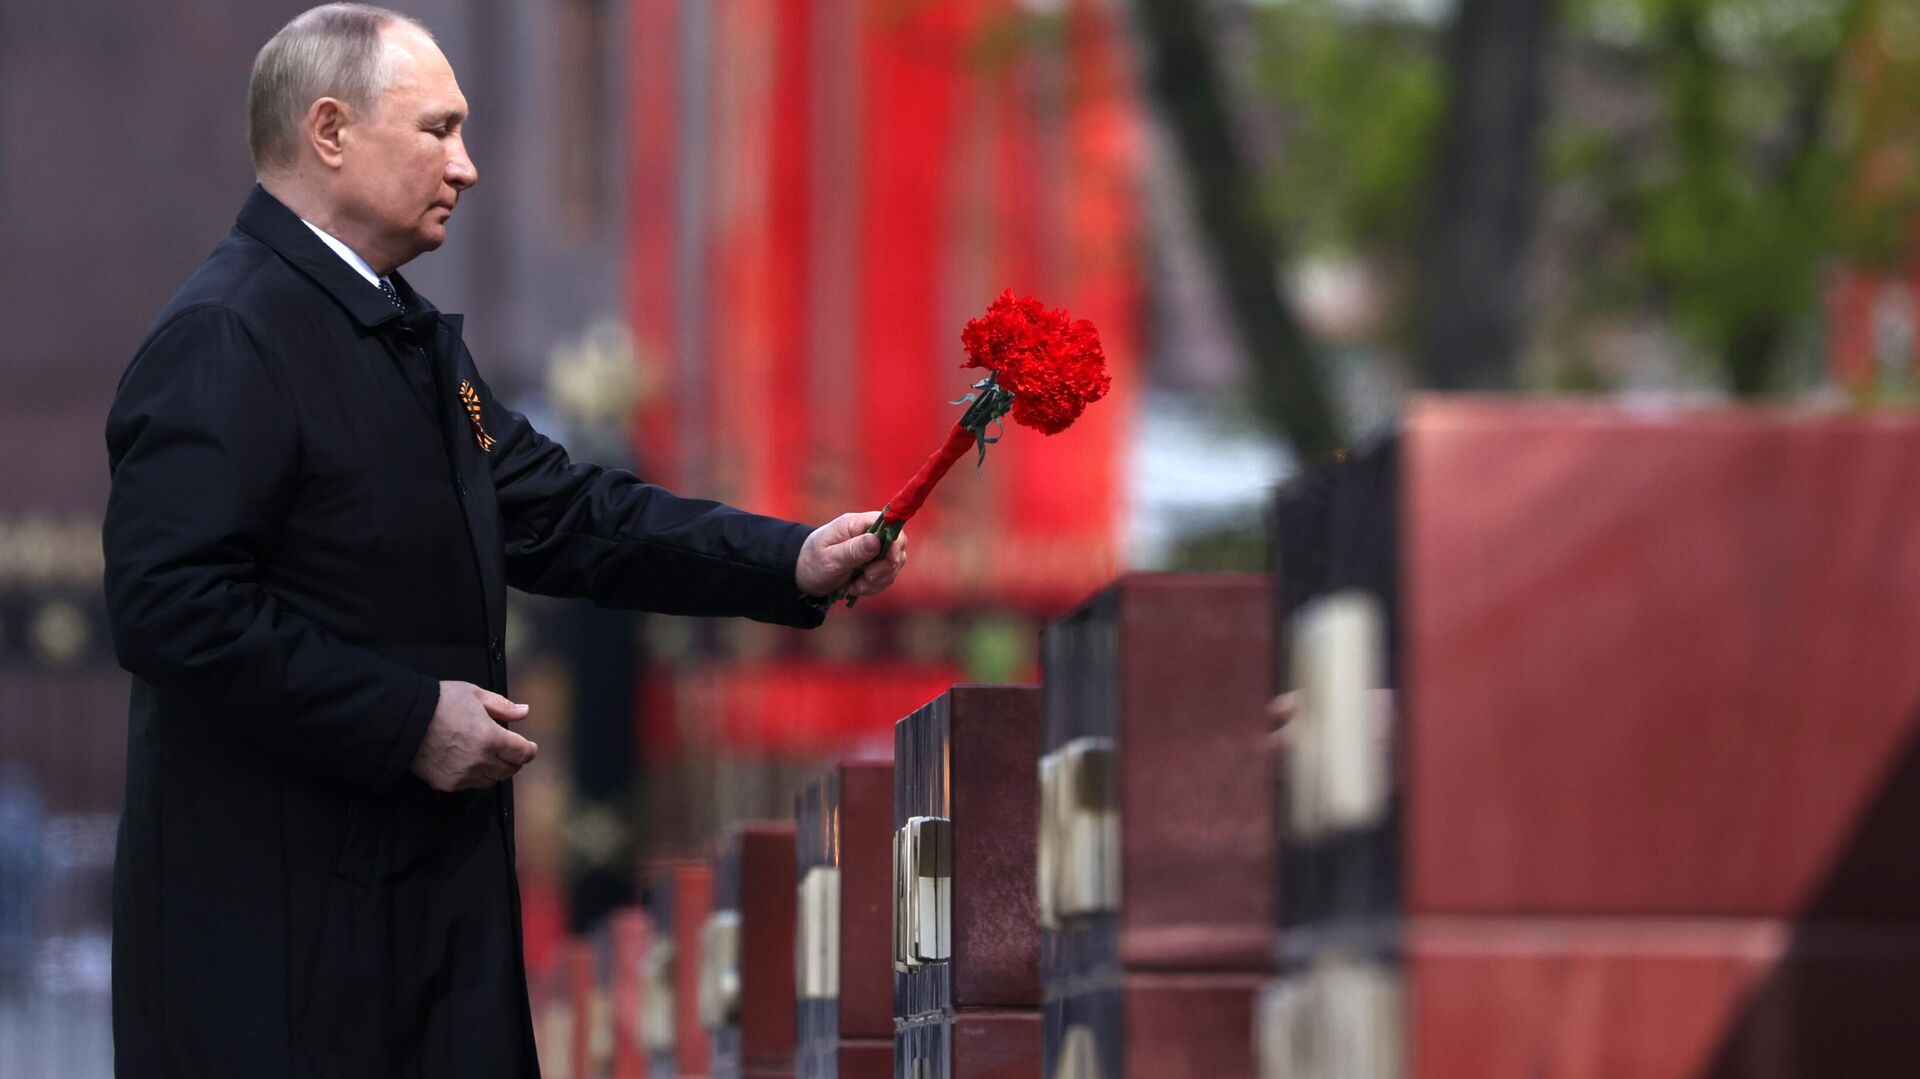 Russian President Vladimir Putin lays flowers at the Alley of Hero Cities before the Grave of the Unknown Soldier in Alexandrov Park, near the Kremlin. Monday 9 May 2022. - Sputnik International, 1920, 09.05.2022